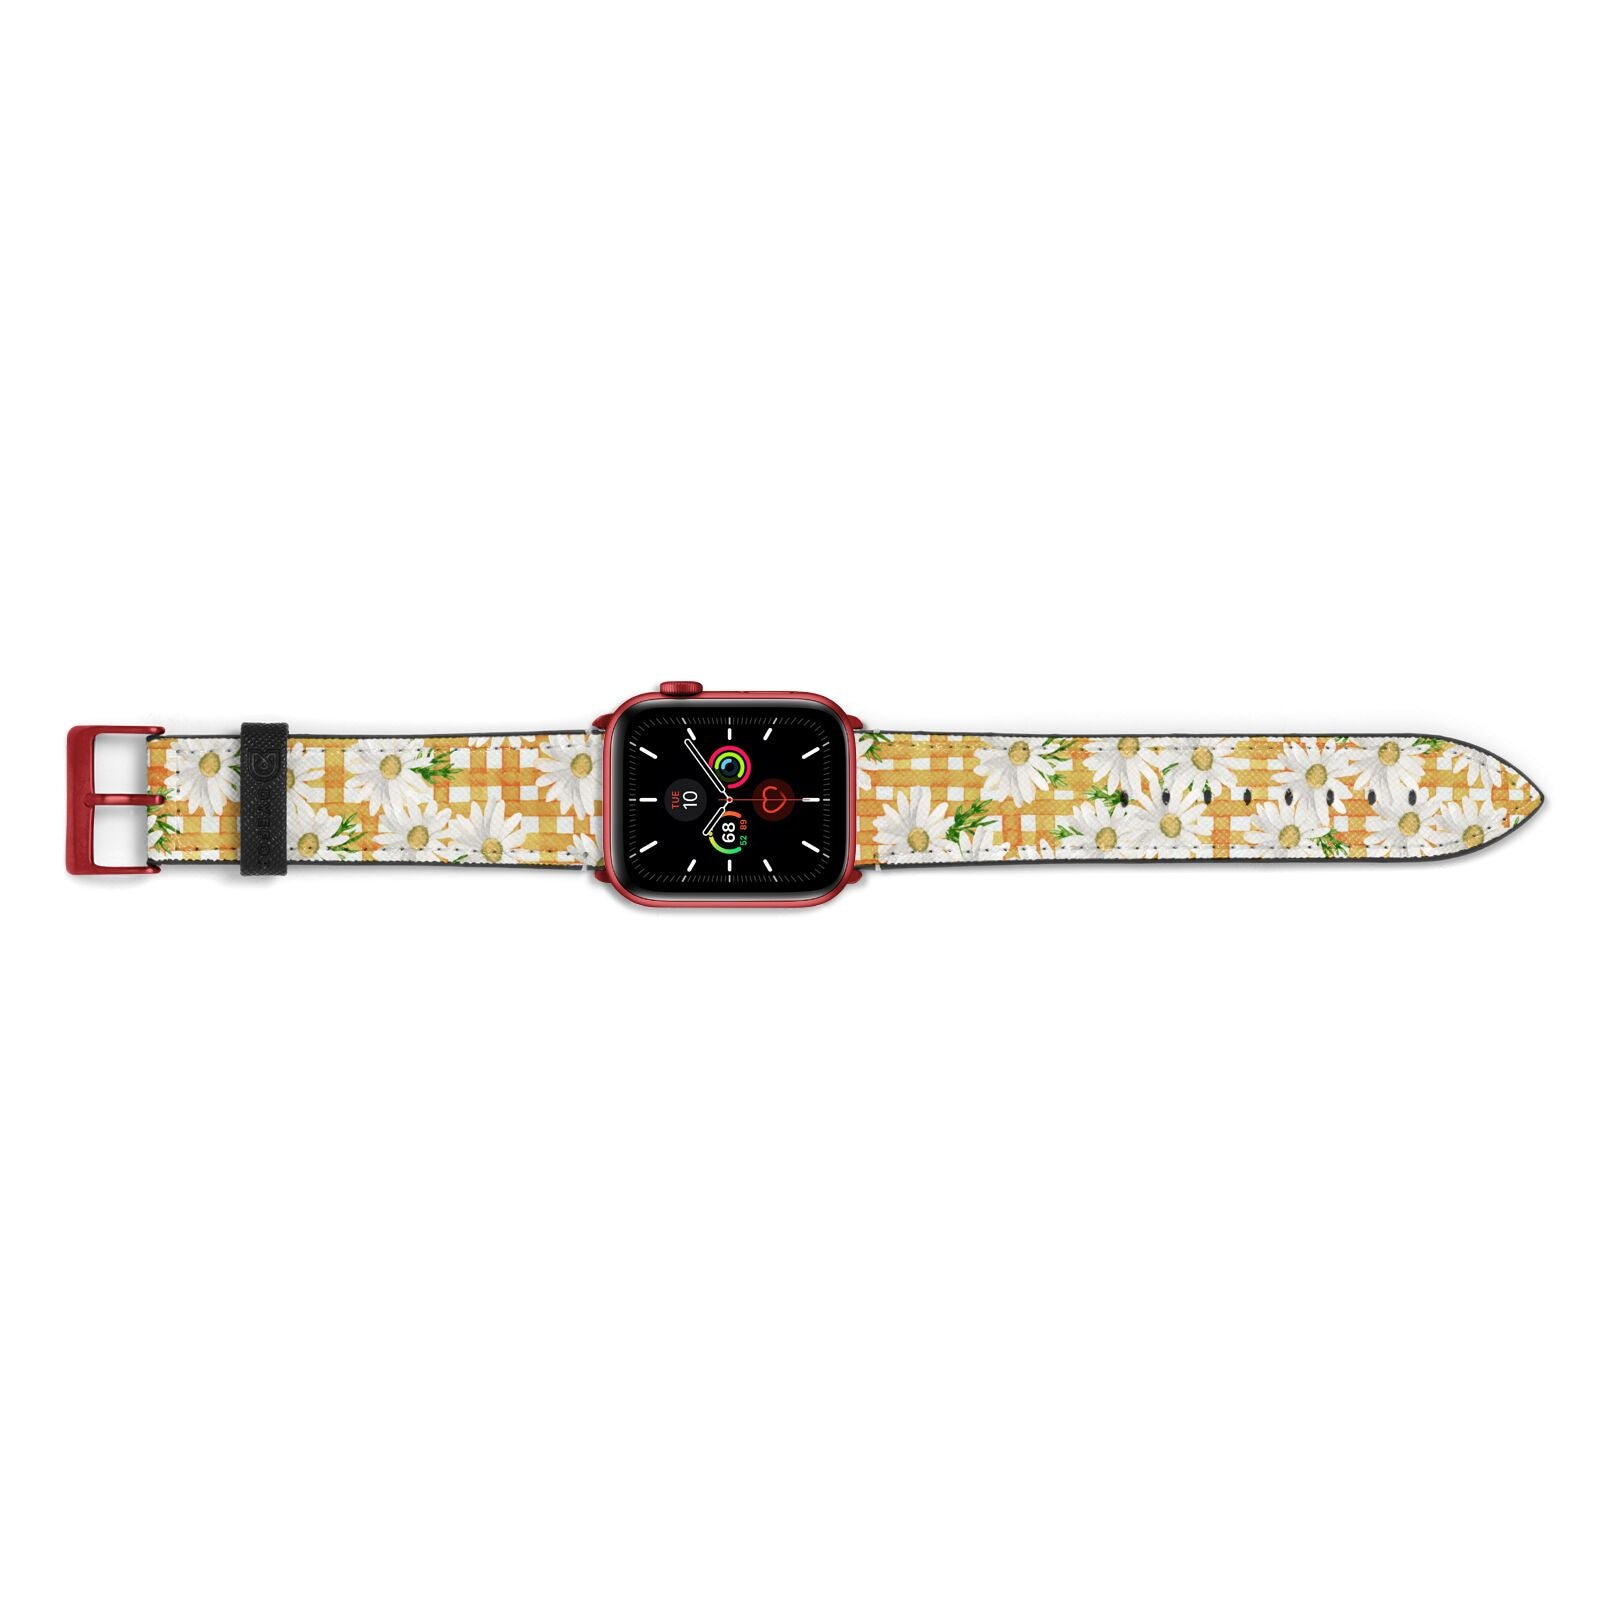 Checkered Daisy Apple Watch Strap Landscape Image Red Hardware